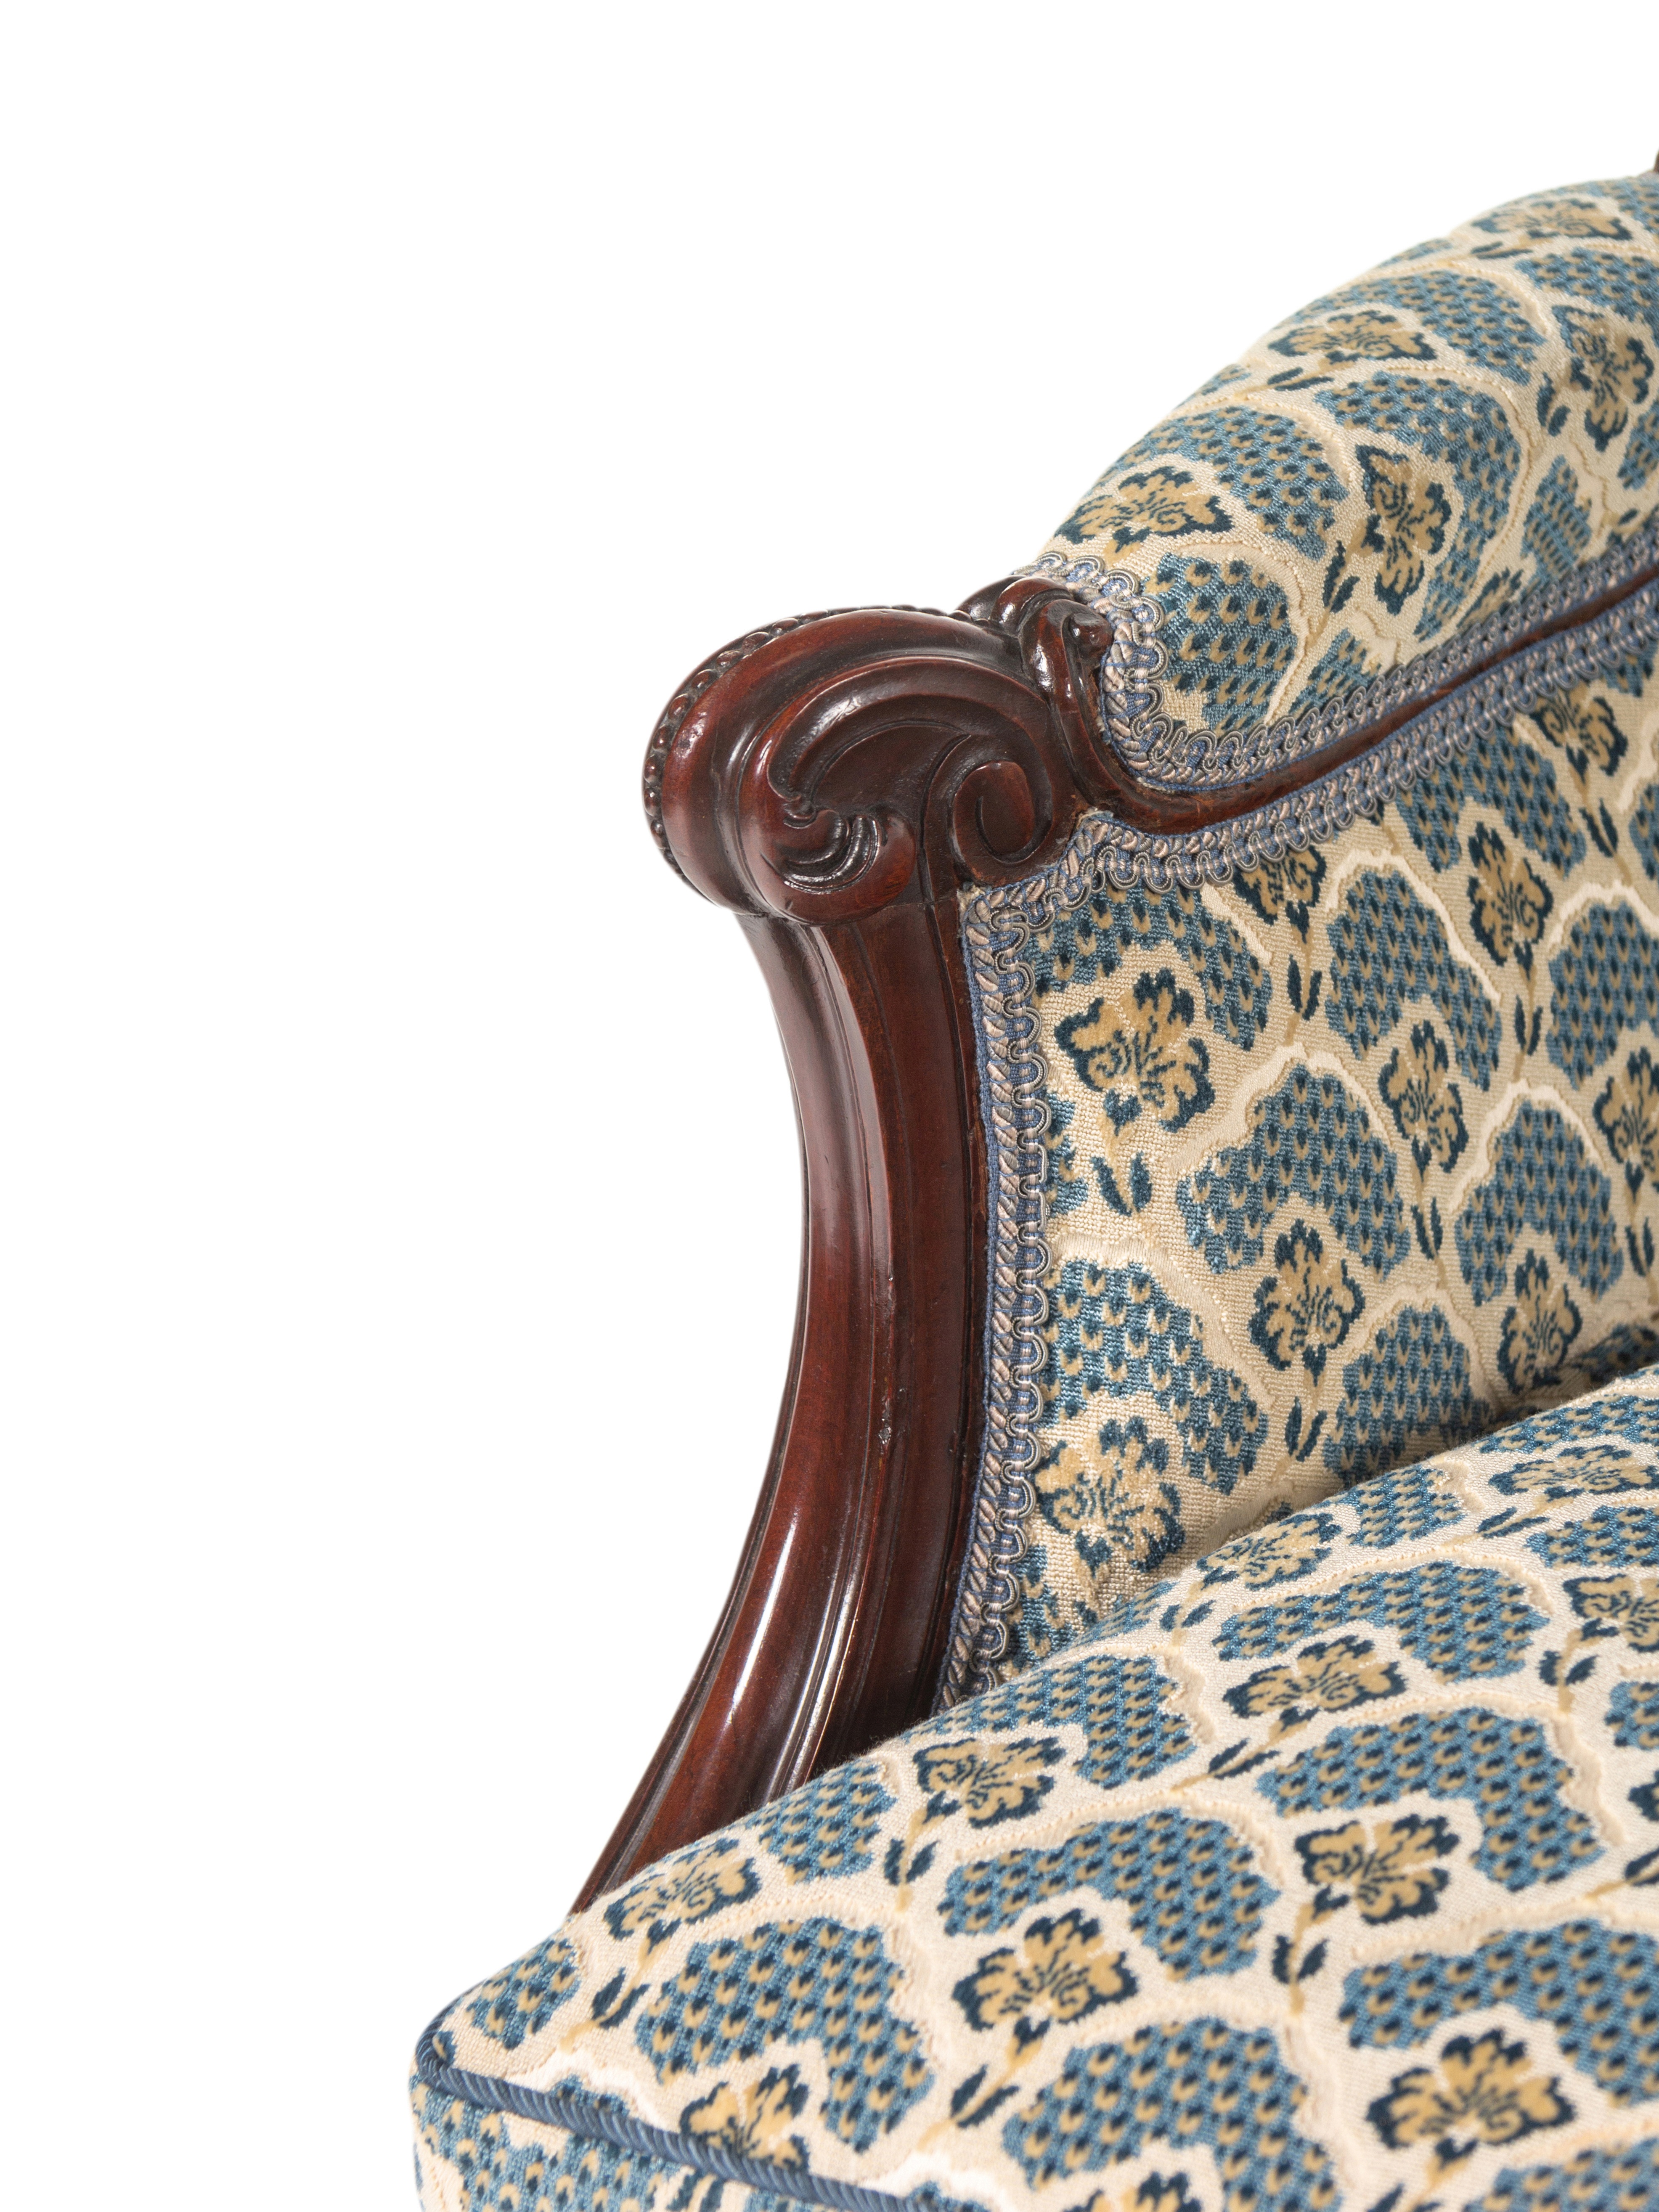 A George III Carved Mahogany Settee - Image 5 of 11